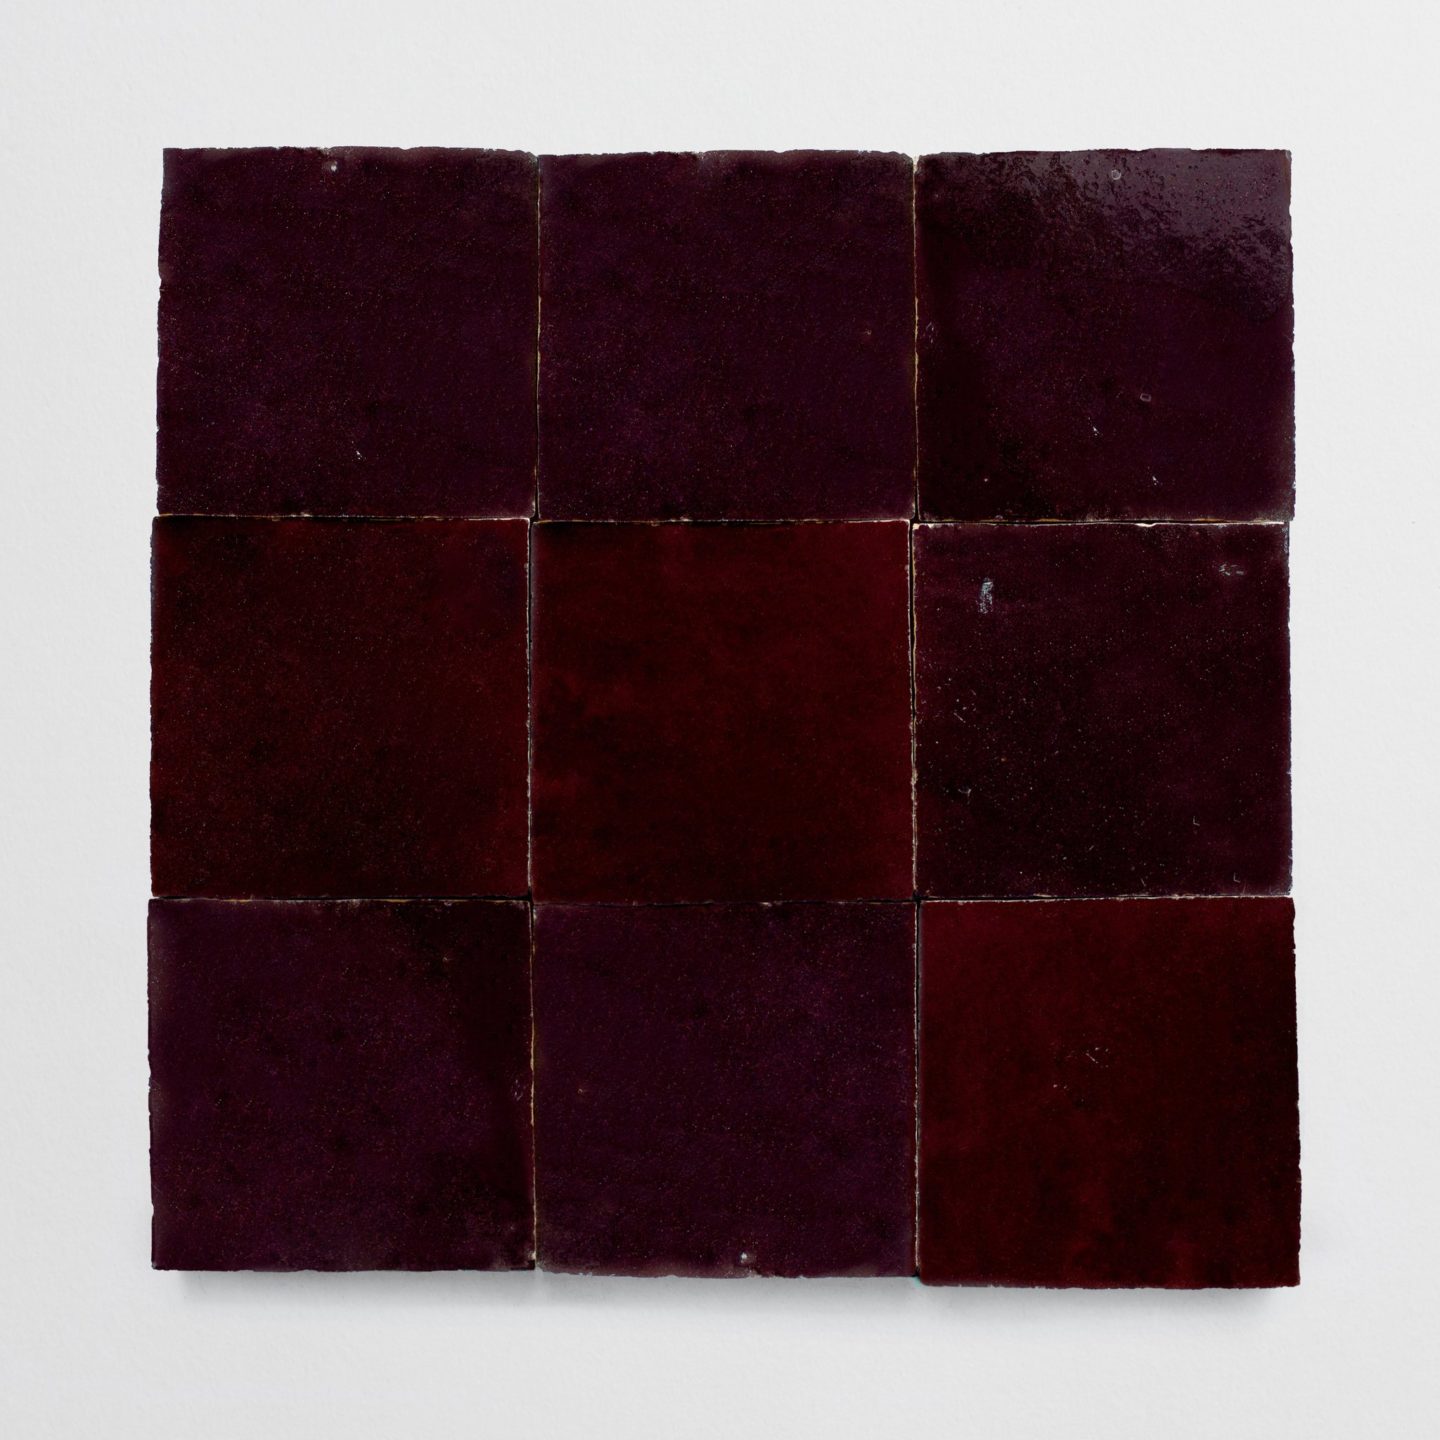 Midnight port zellige 2"x2" tiles by Cle Tile
